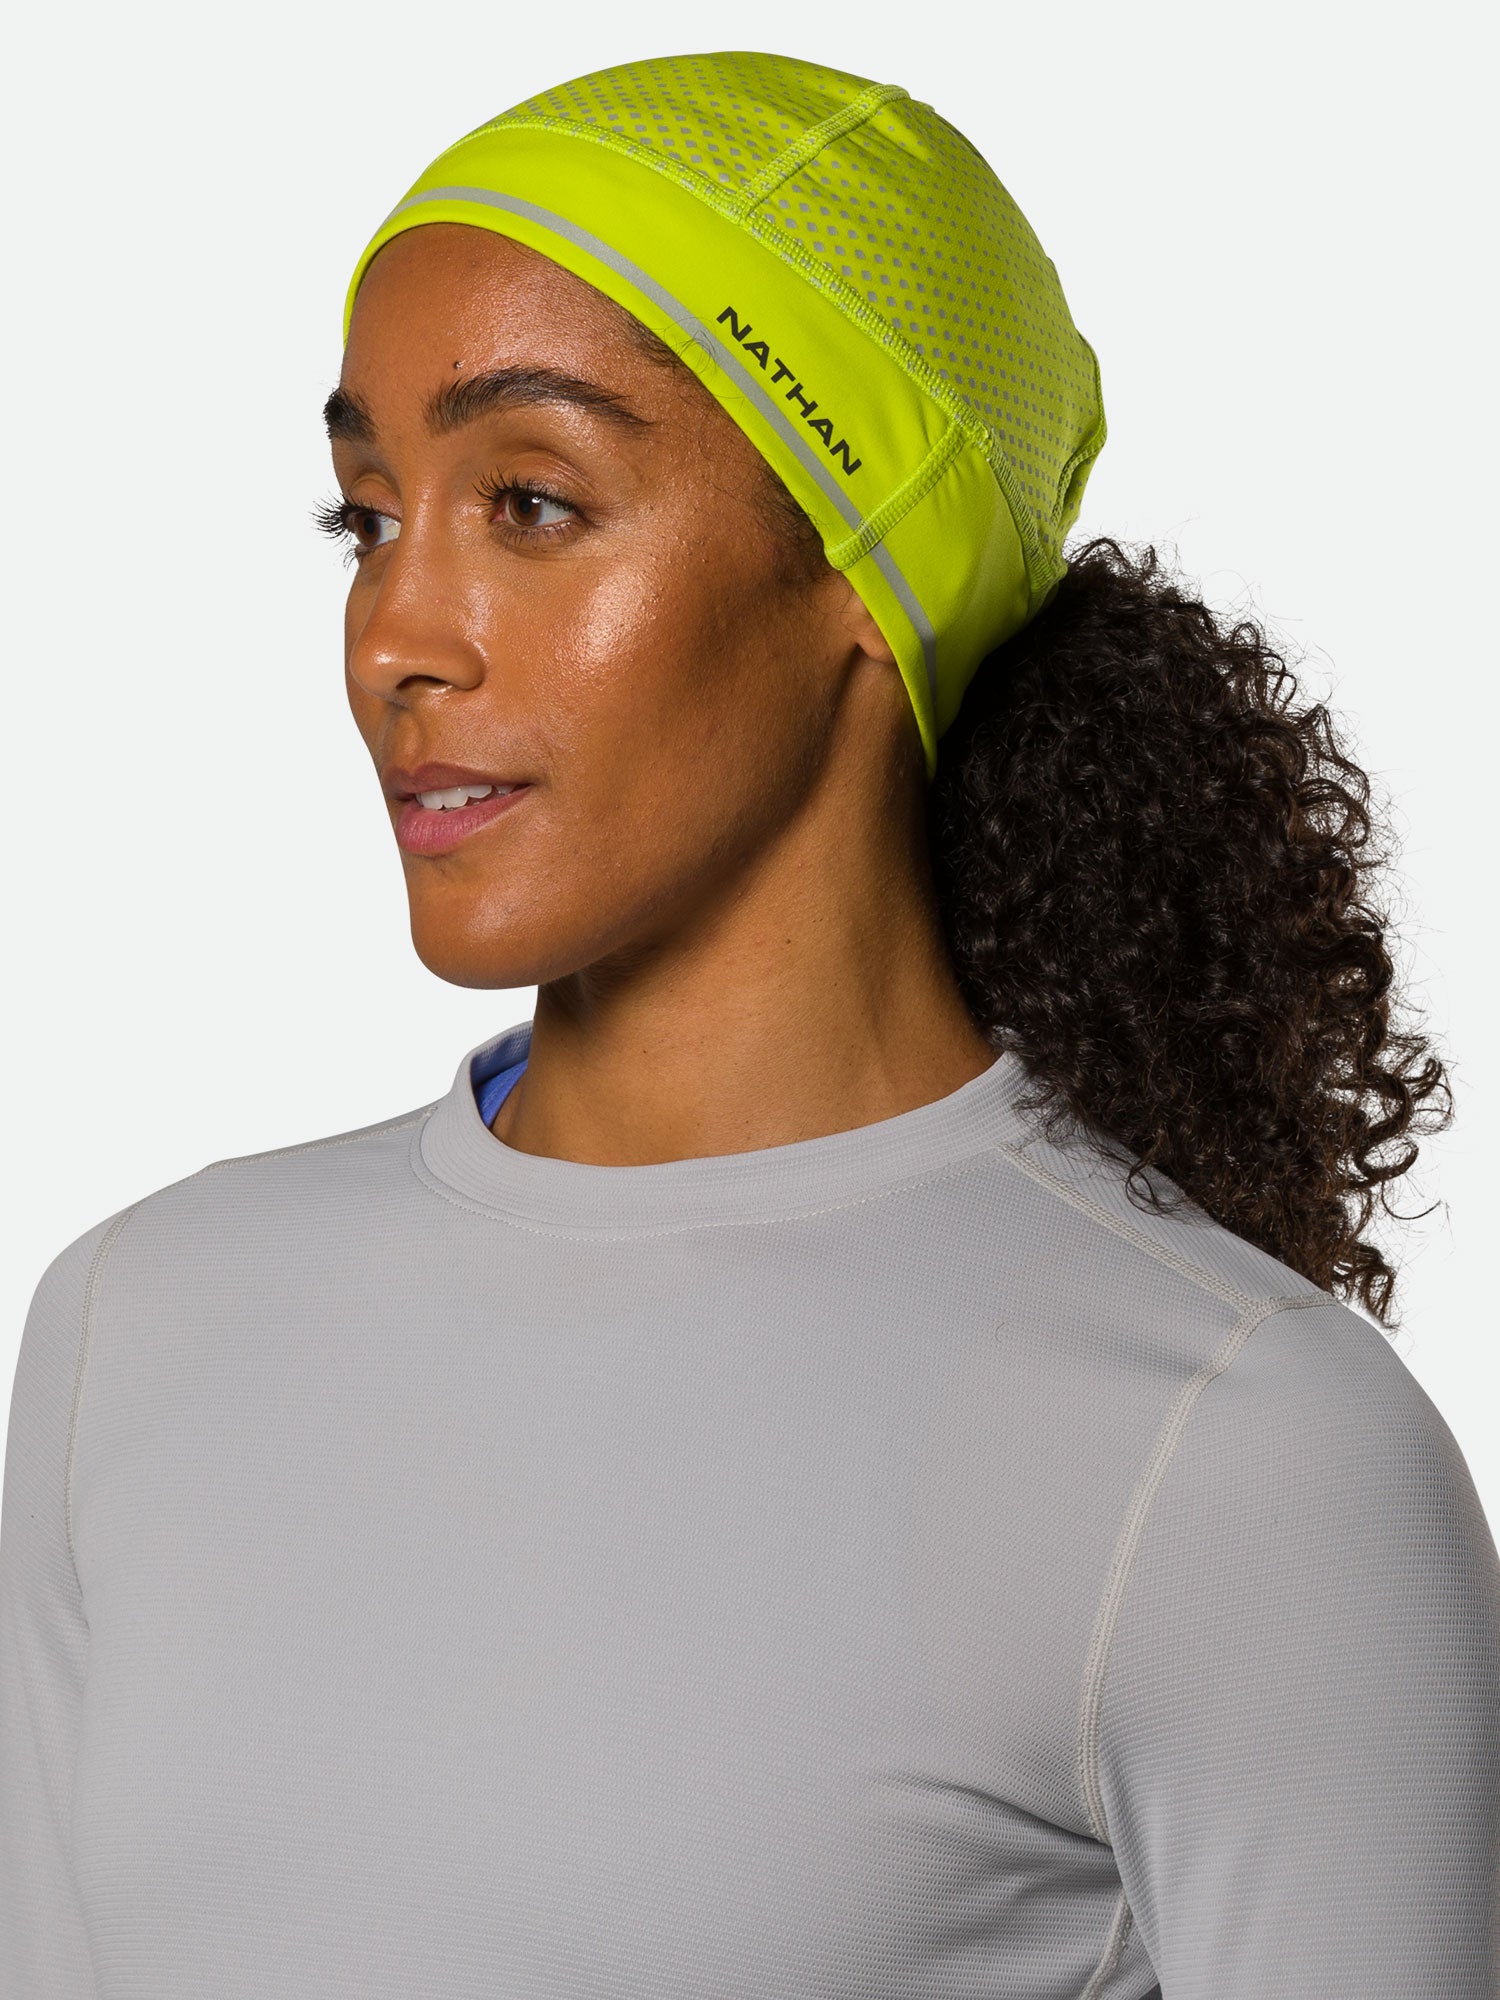 Nathan HyperNight Reflective Ponytail Safety Beanie - Hi Vis Yellow - On Model - Front View